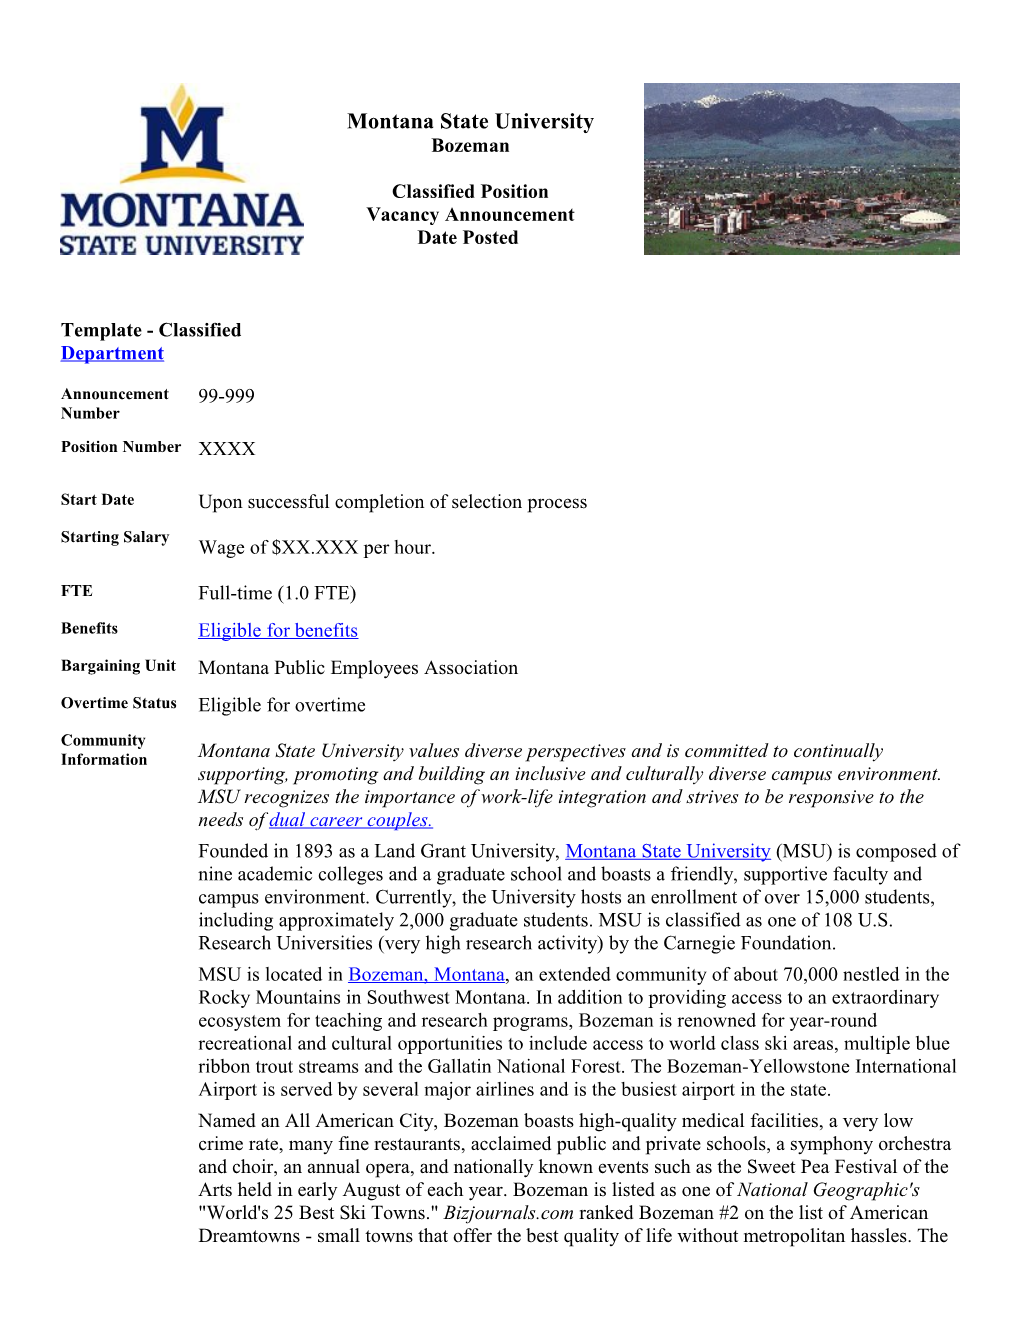 Montana State University Bozeman Classified Position Vacancy Announcement Date Posted